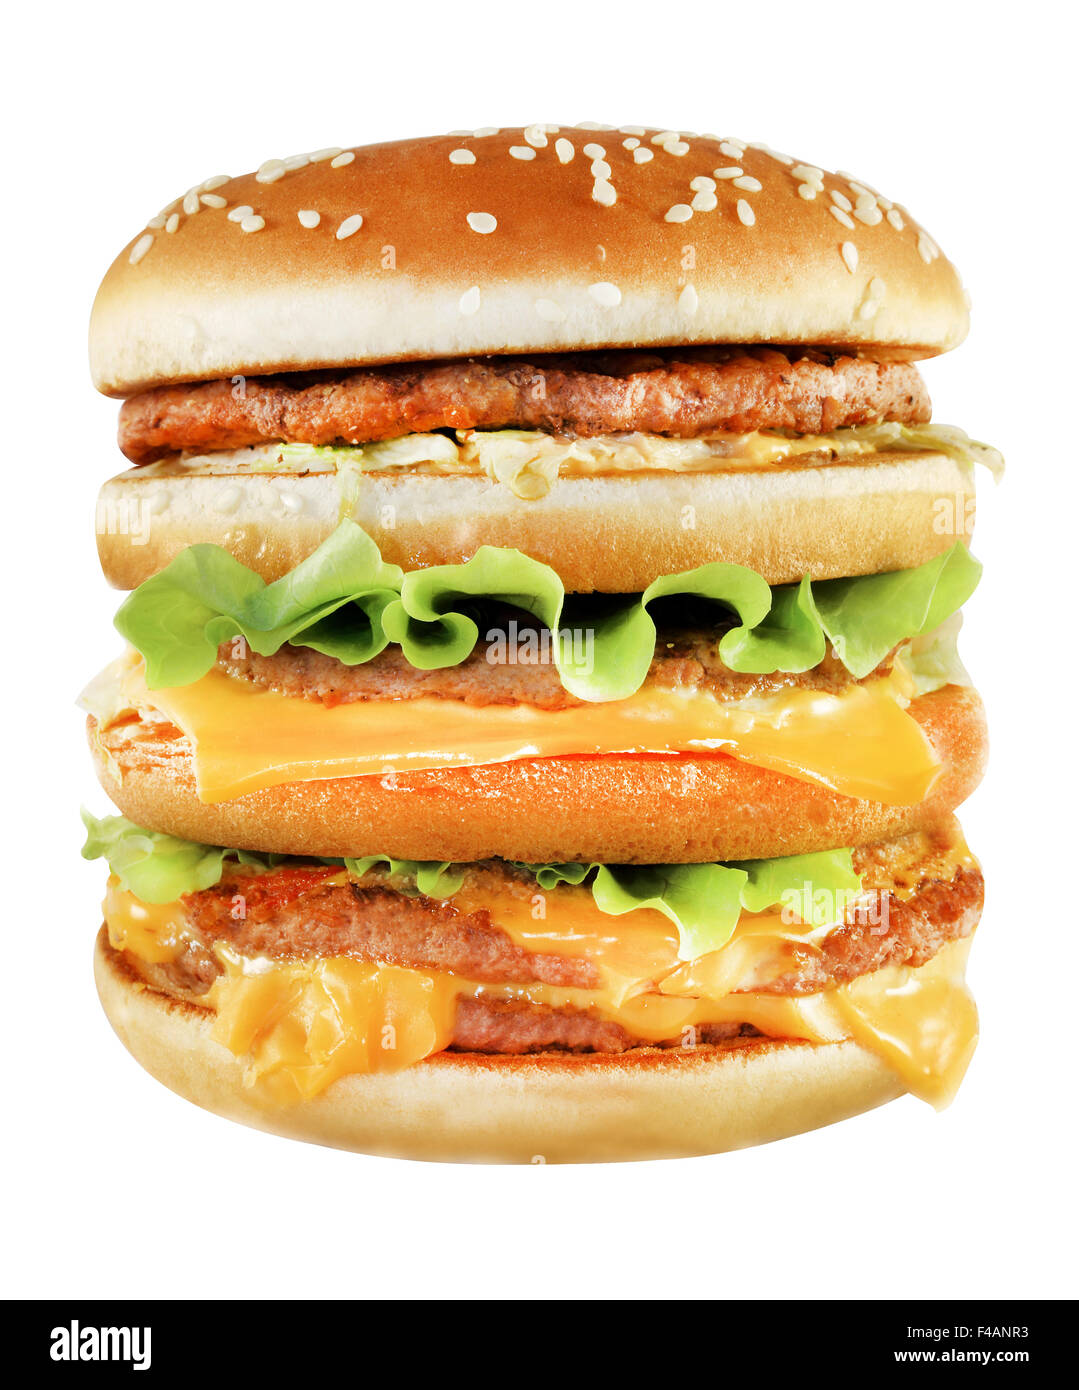 Tasty big burger  photographed close-up on a white background Stock Photo